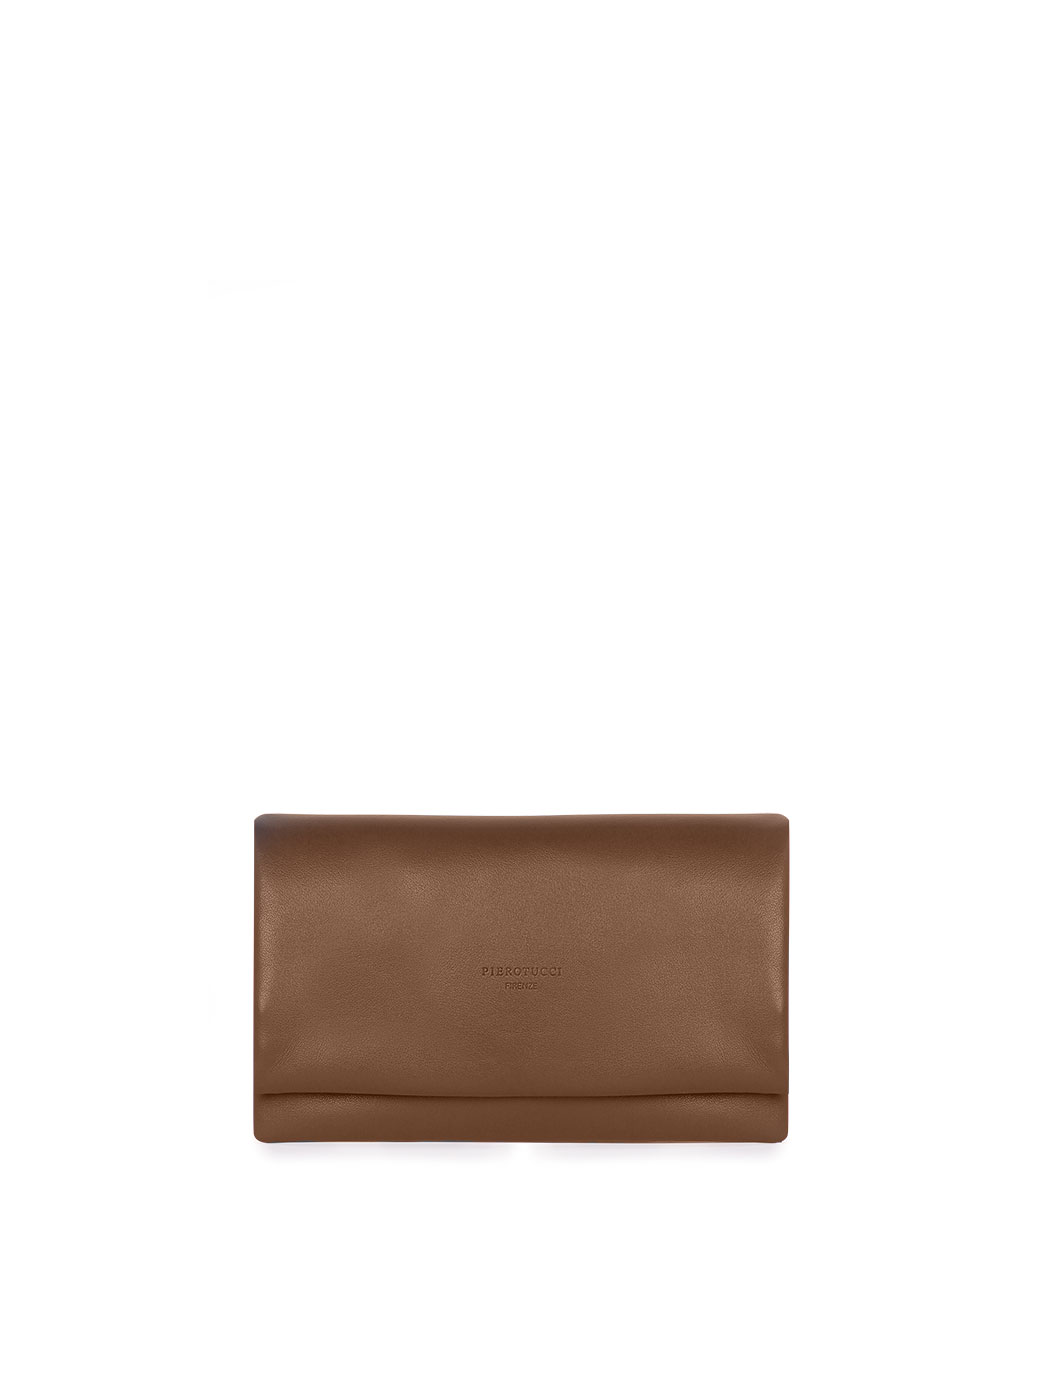 Distressed Leather Pouch Clutch - Dark Brown – Urban State Indonesia